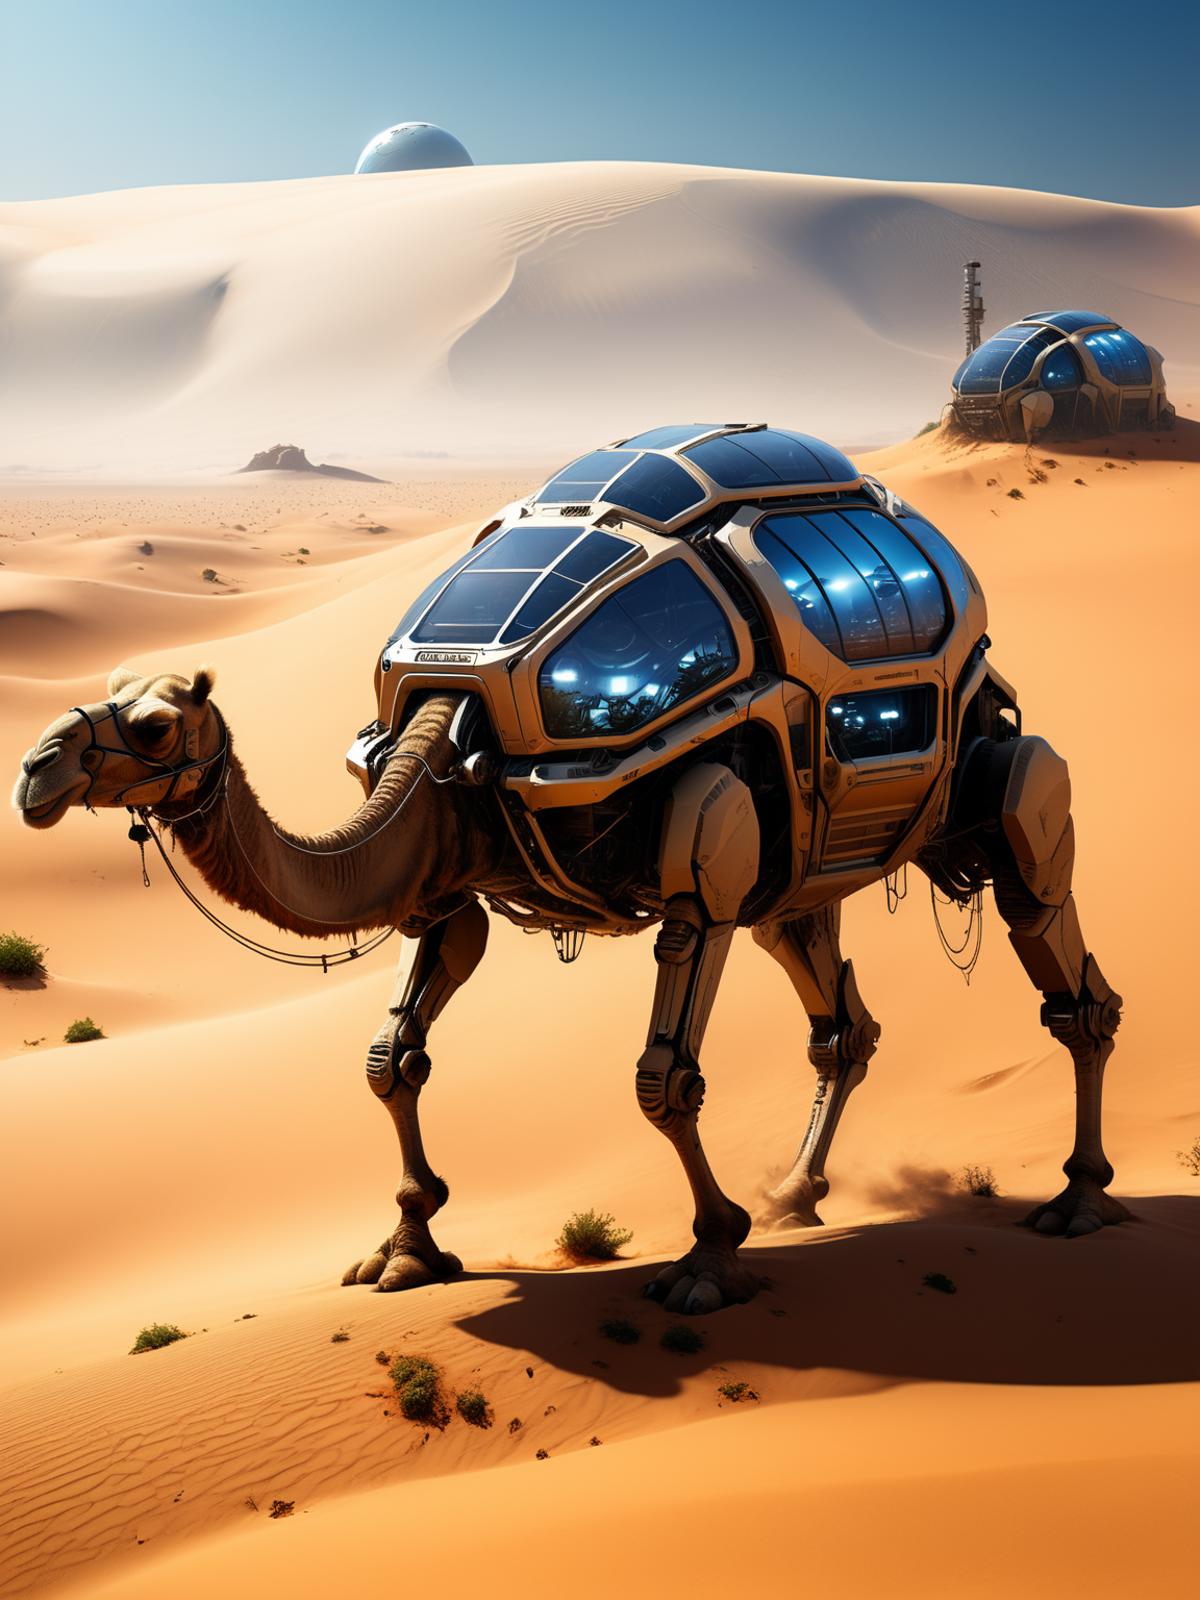 A Camel with a Machine on its Back in a Desert Environment